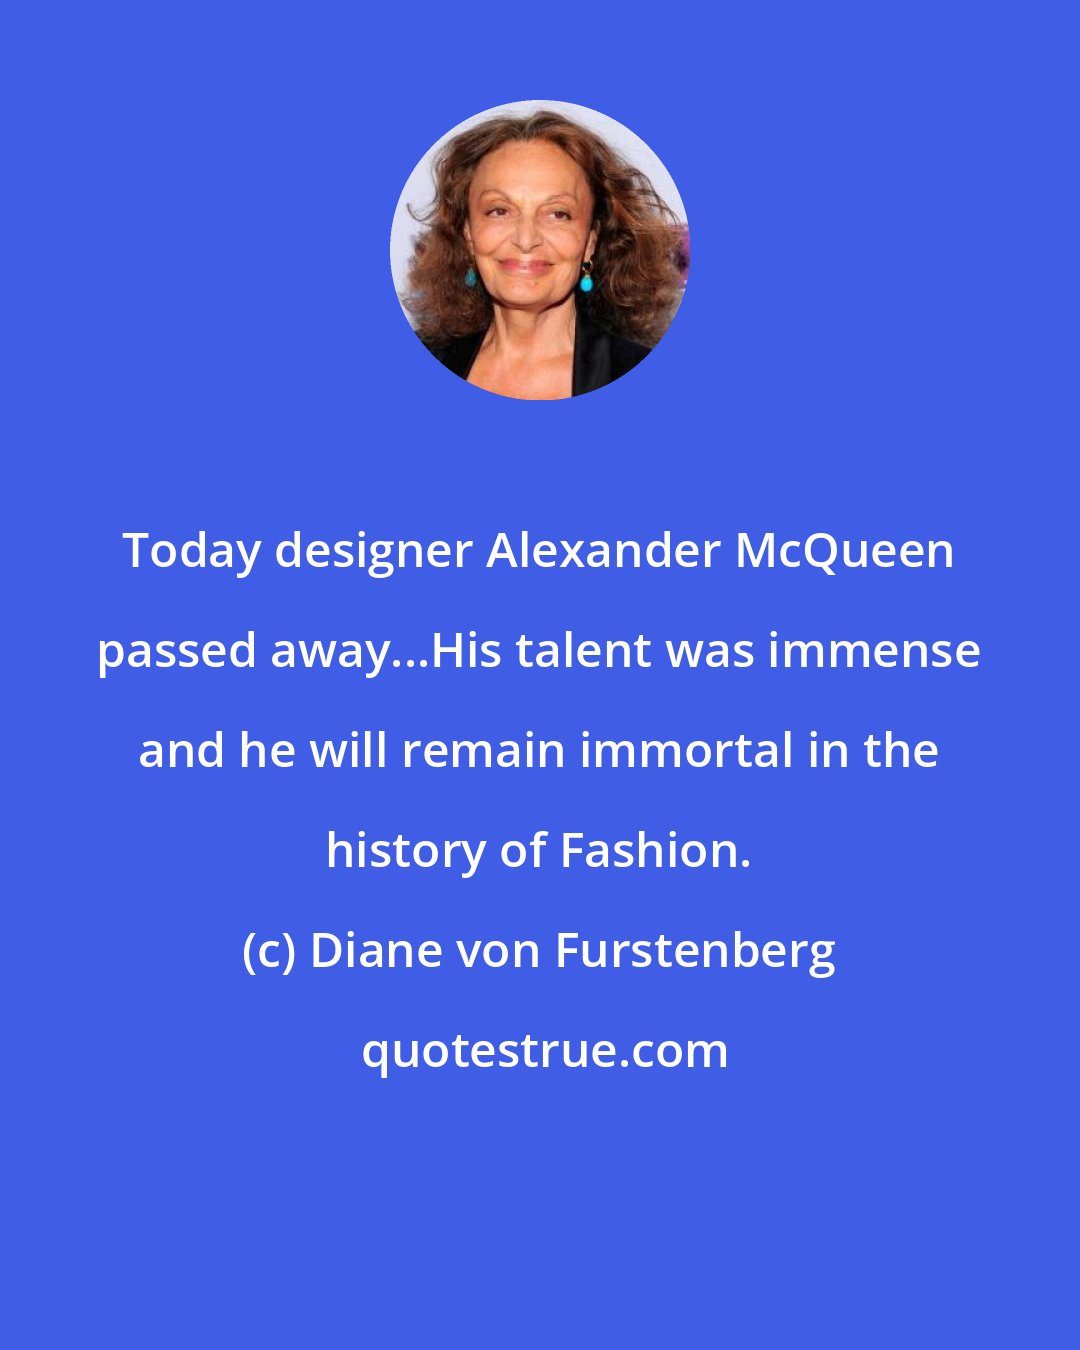 Diane von Furstenberg: Today designer Alexander McQueen passed away...His talent was immense and he will remain immortal in the history of Fashion.